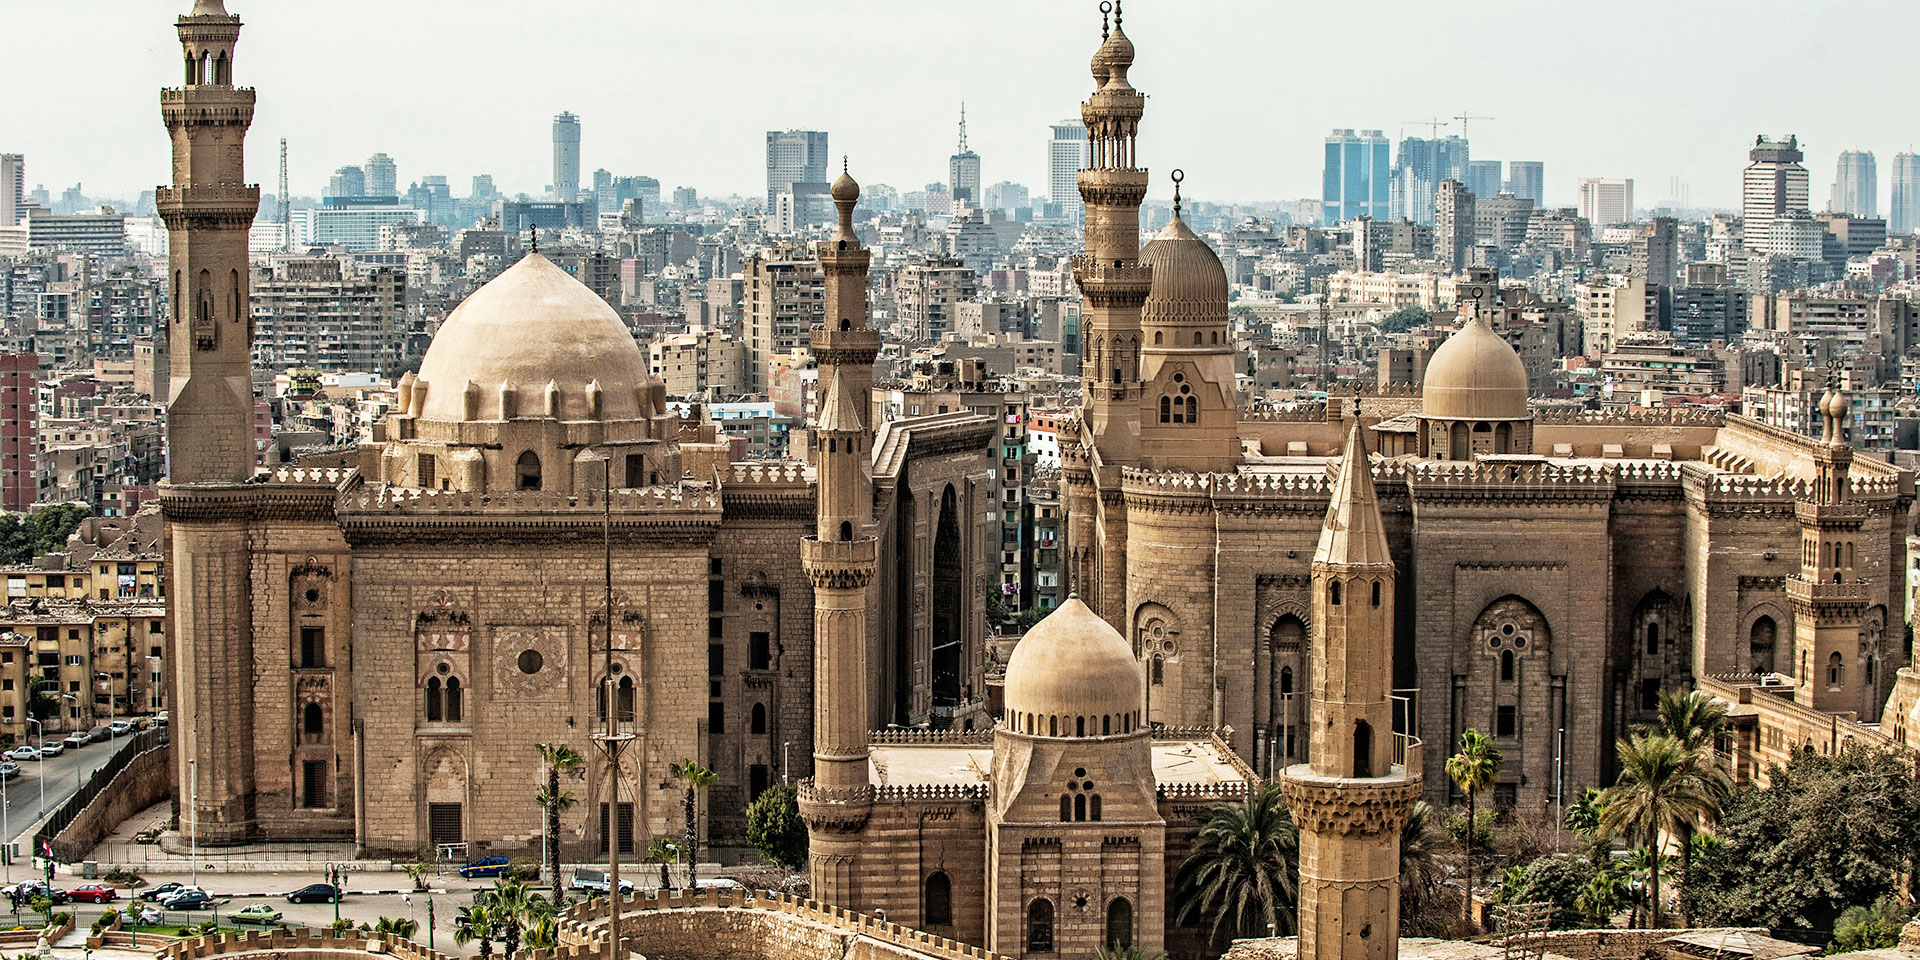 Visiting the City of a Thousand Minarets? Take a Tour of Cairo’s Historic Mosques